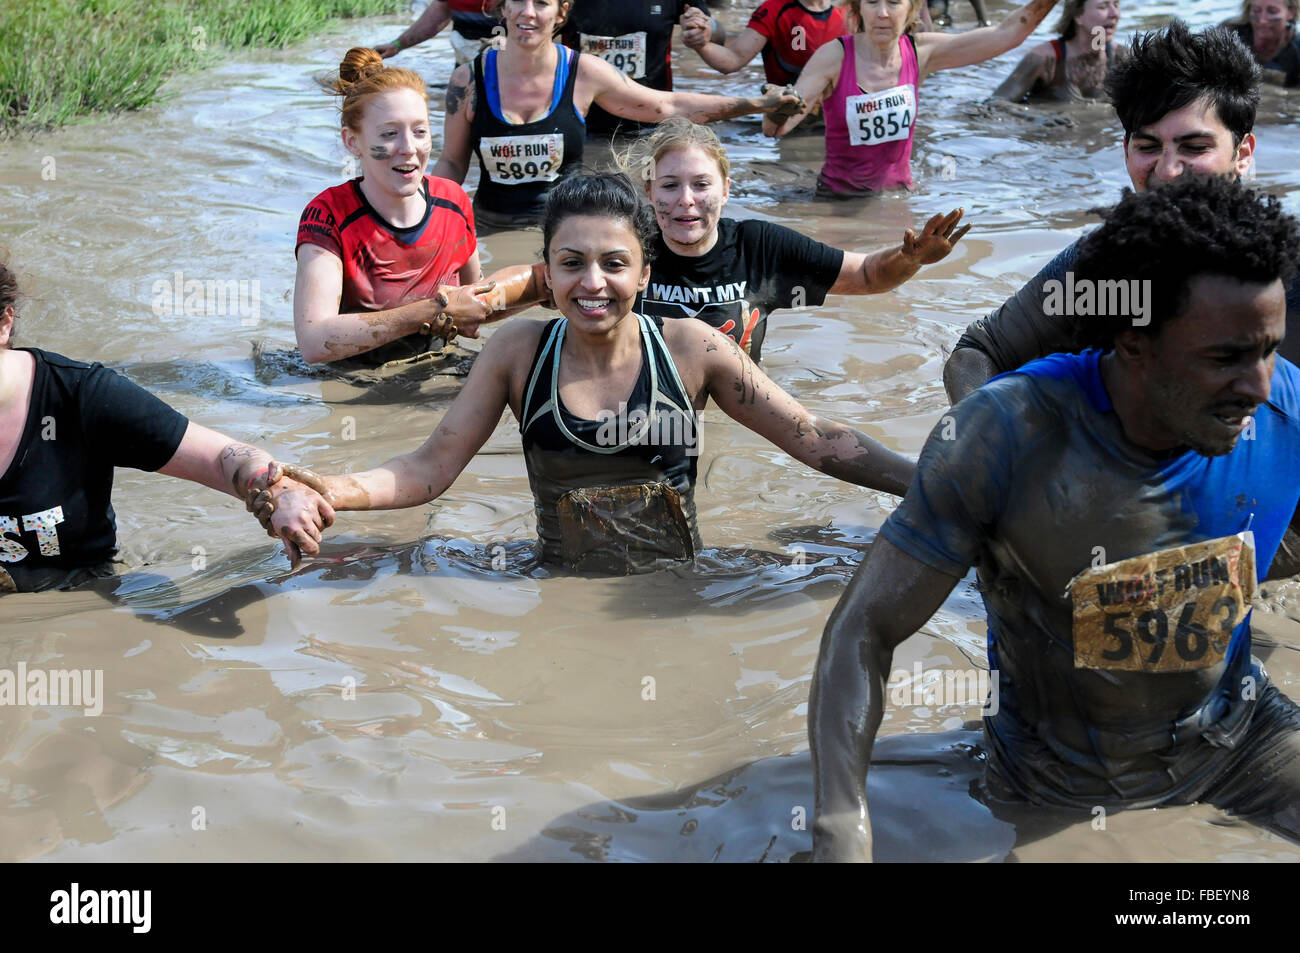 Young female asian runner in mud lake at obstacle course race, UK Stock Photo